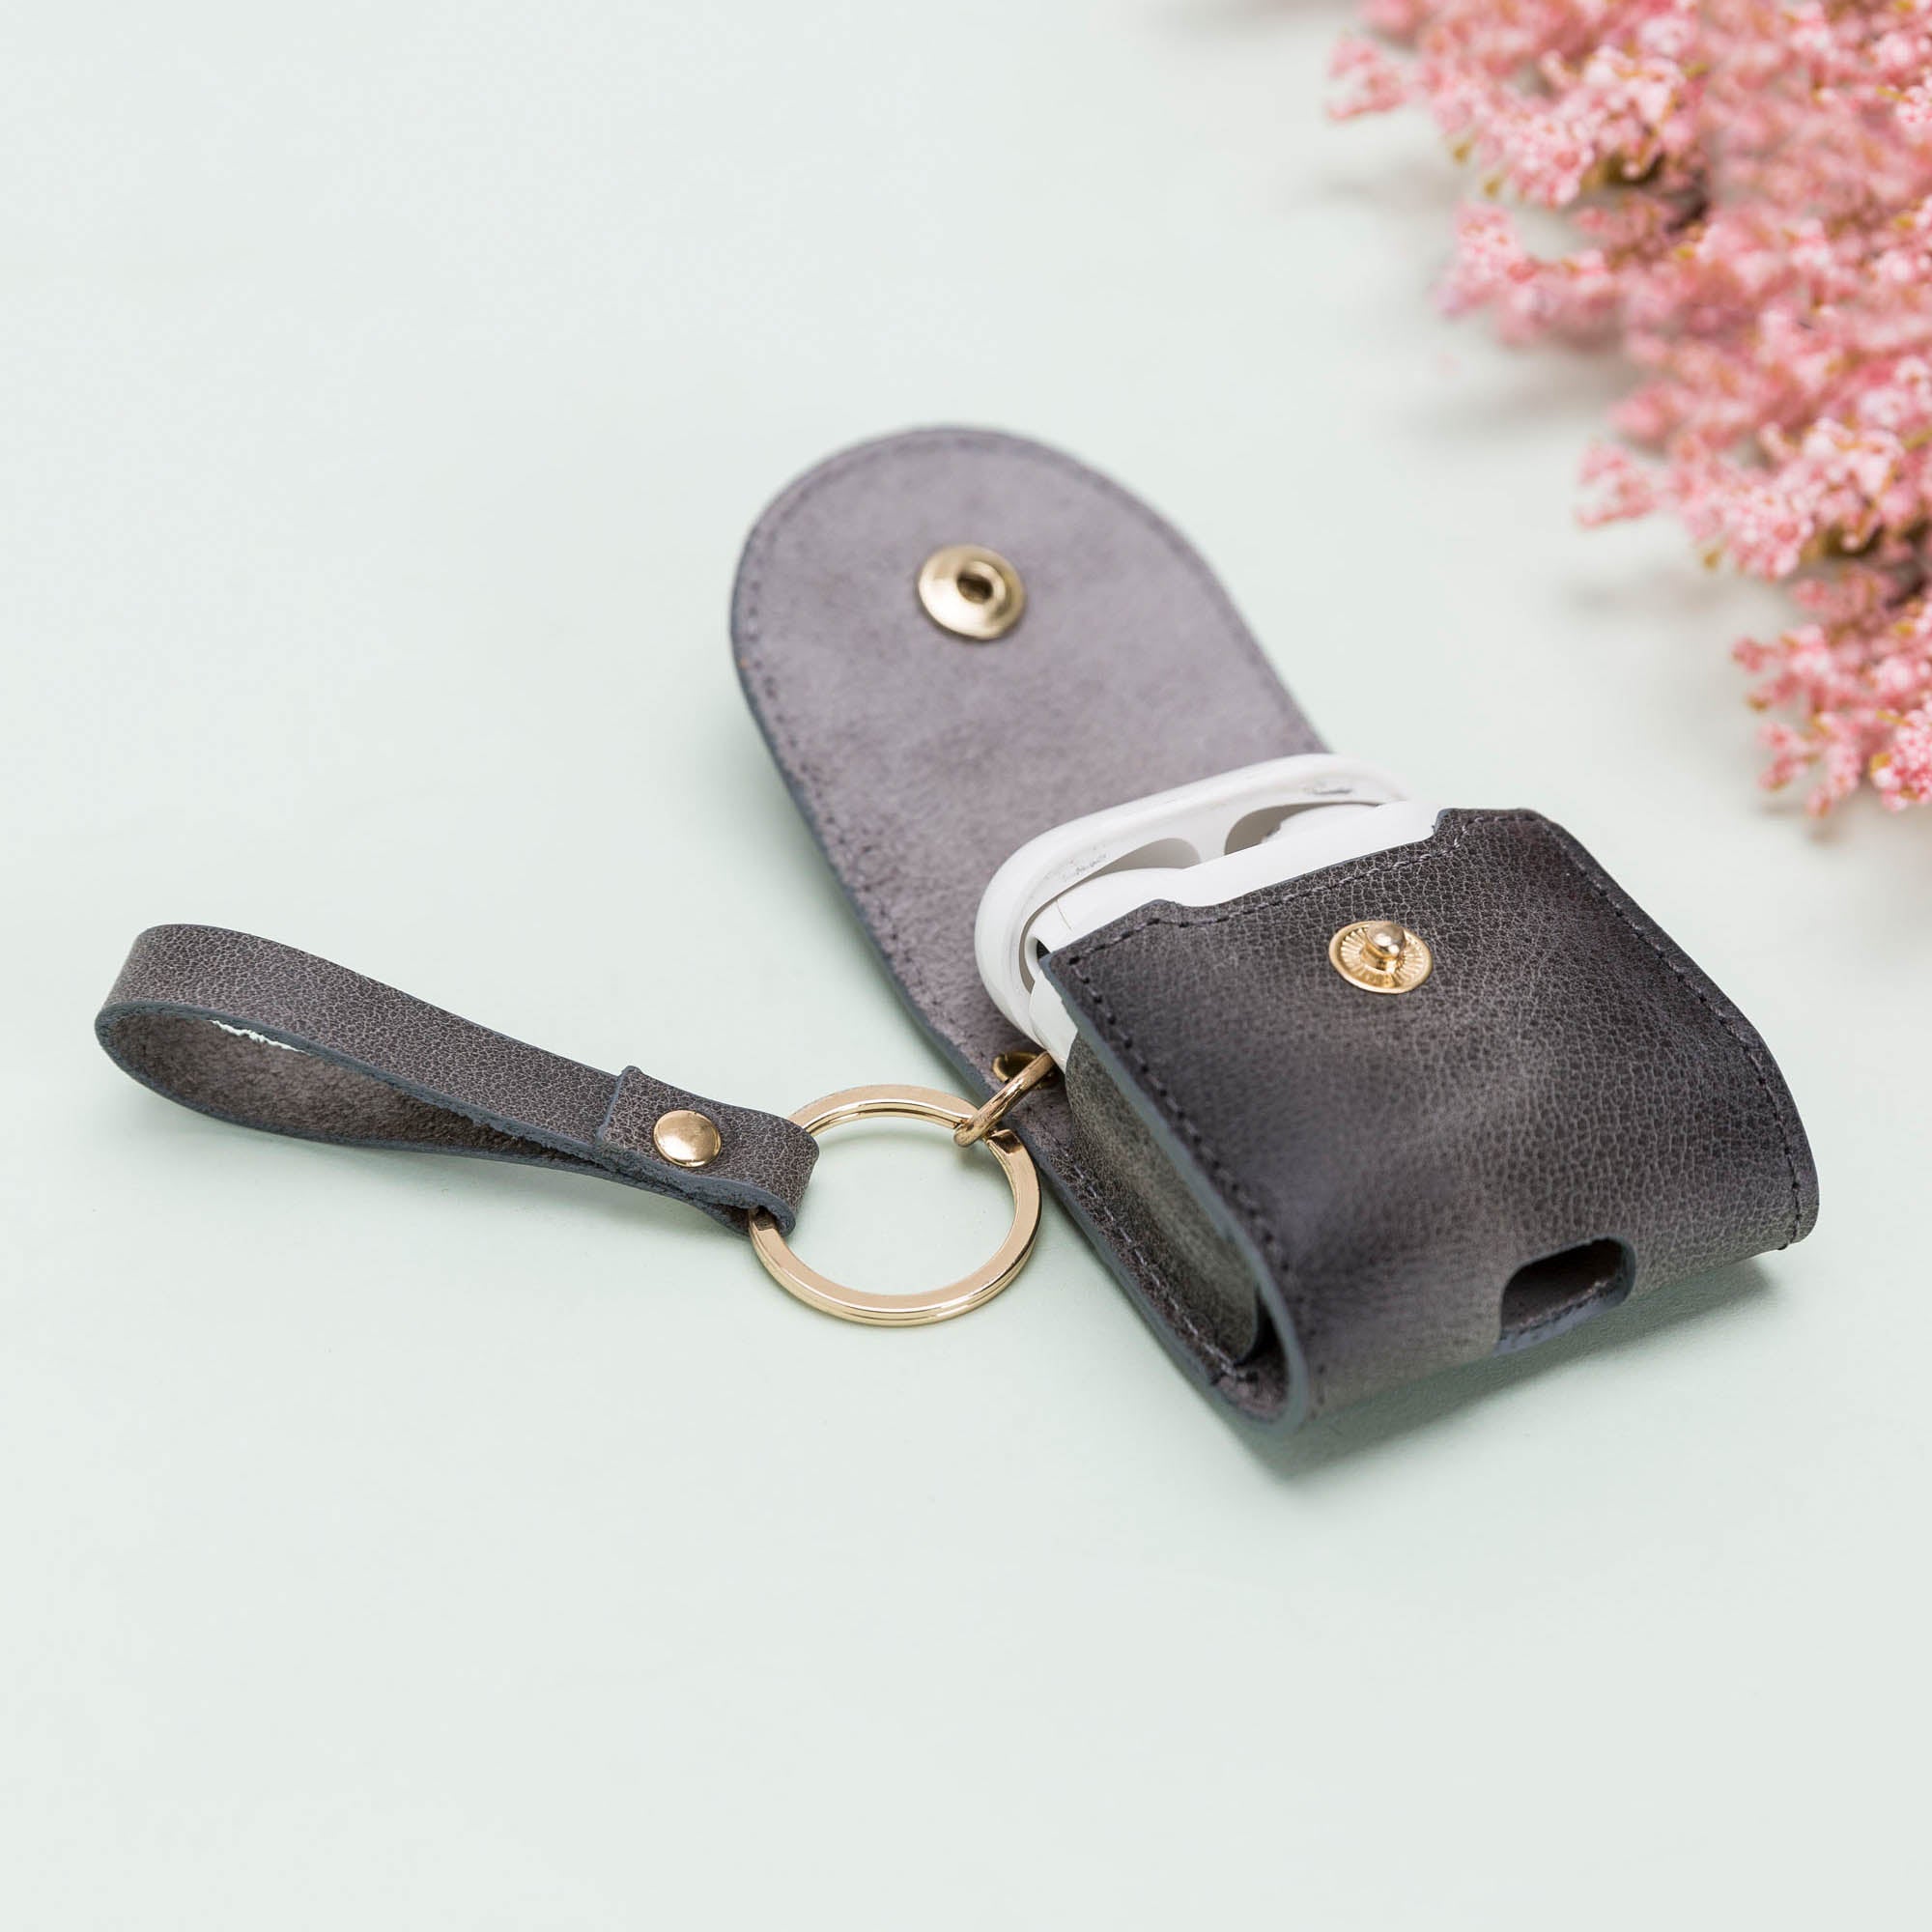 Mai Leather Case for AirPods 1 & 2 - GRAY - saracleather